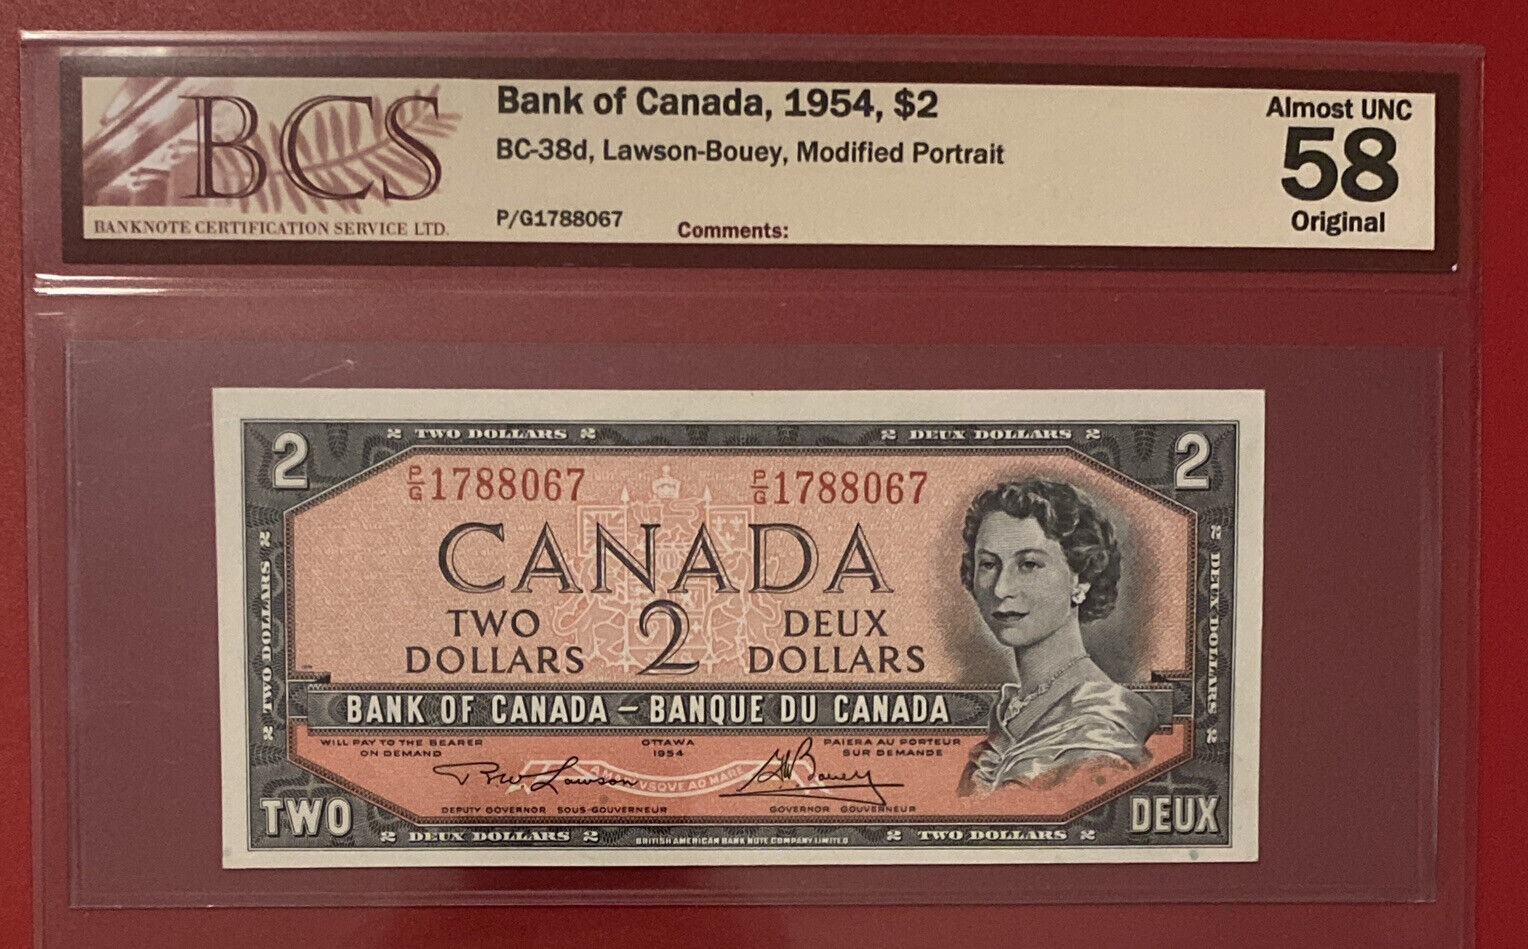 1954 Bank of Canada $2 Dollar Note BCS Graded AU-58 (P/G 1788067) Modified